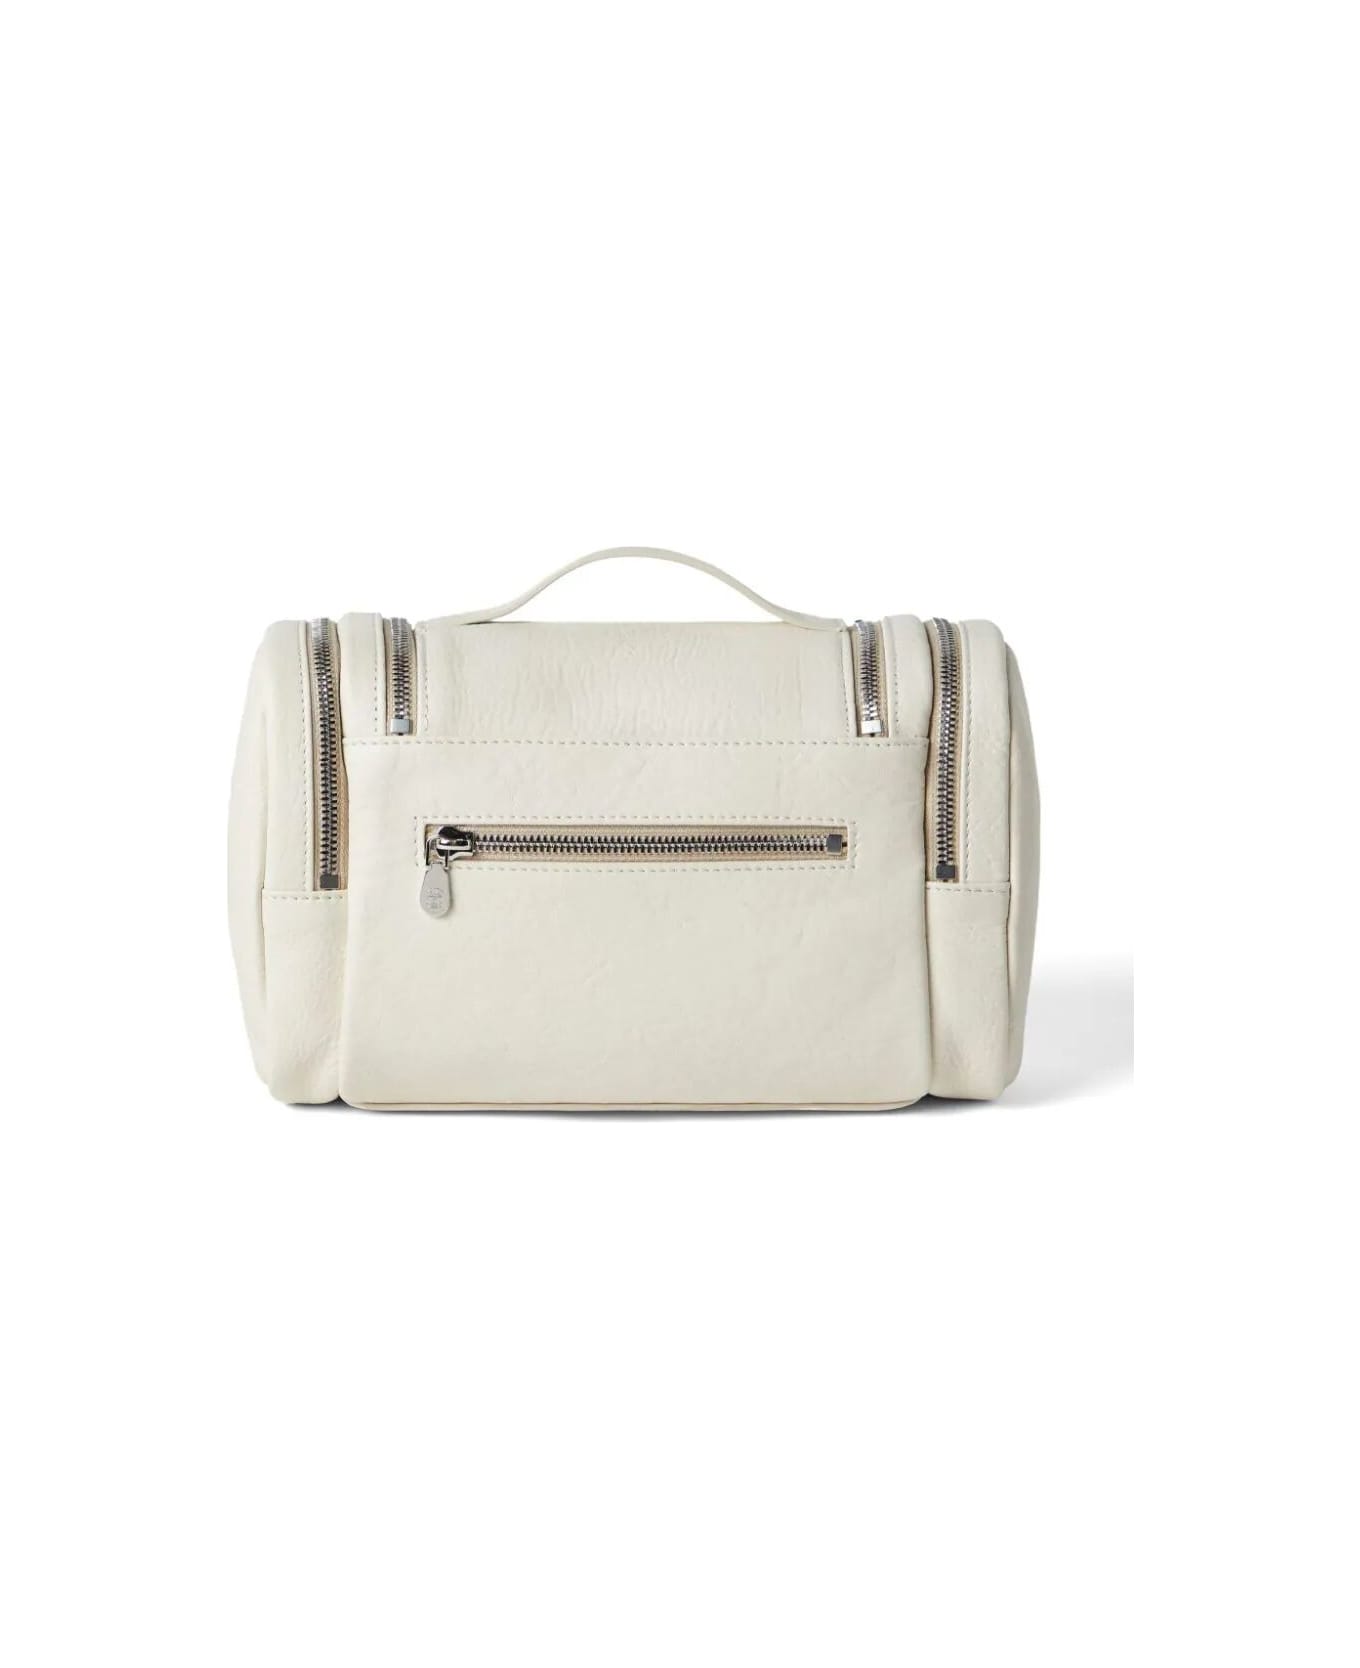 Brunello Cucinelli Leather Beauty Case - English White トラベルバッグ